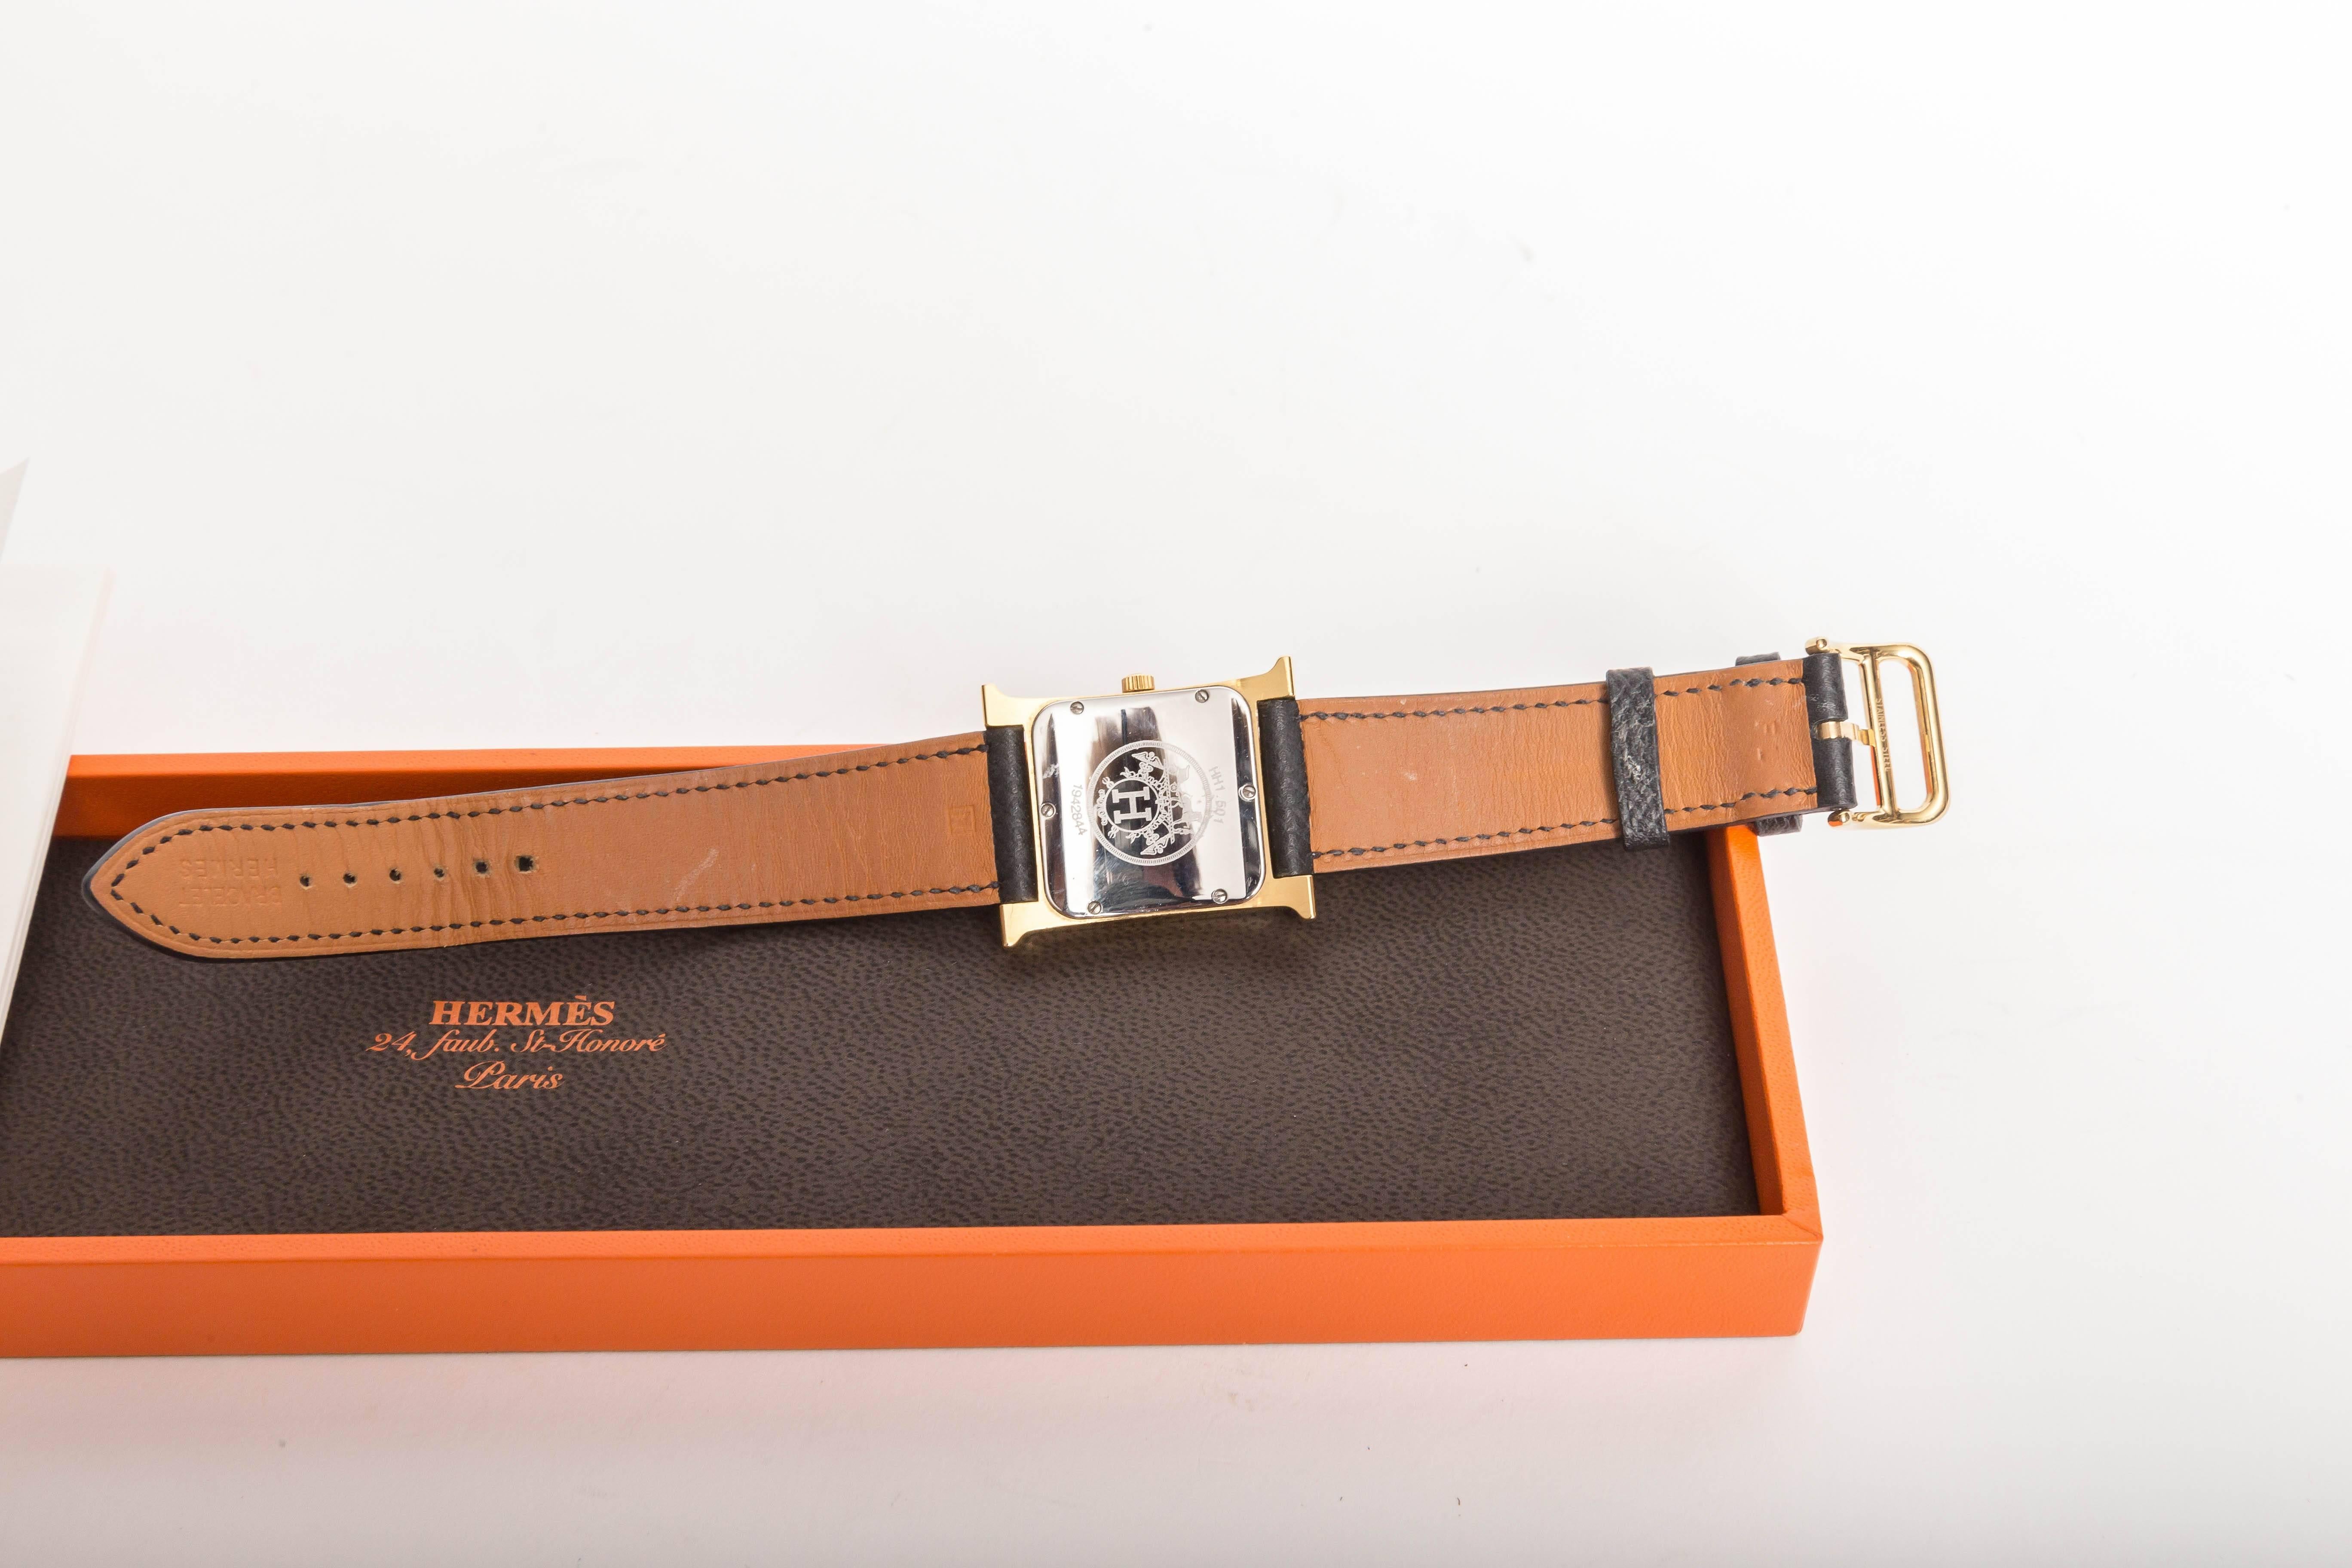 Hermes Heure H Watch in Goldtone Stainless Steel on a Grained Leather Strap 4